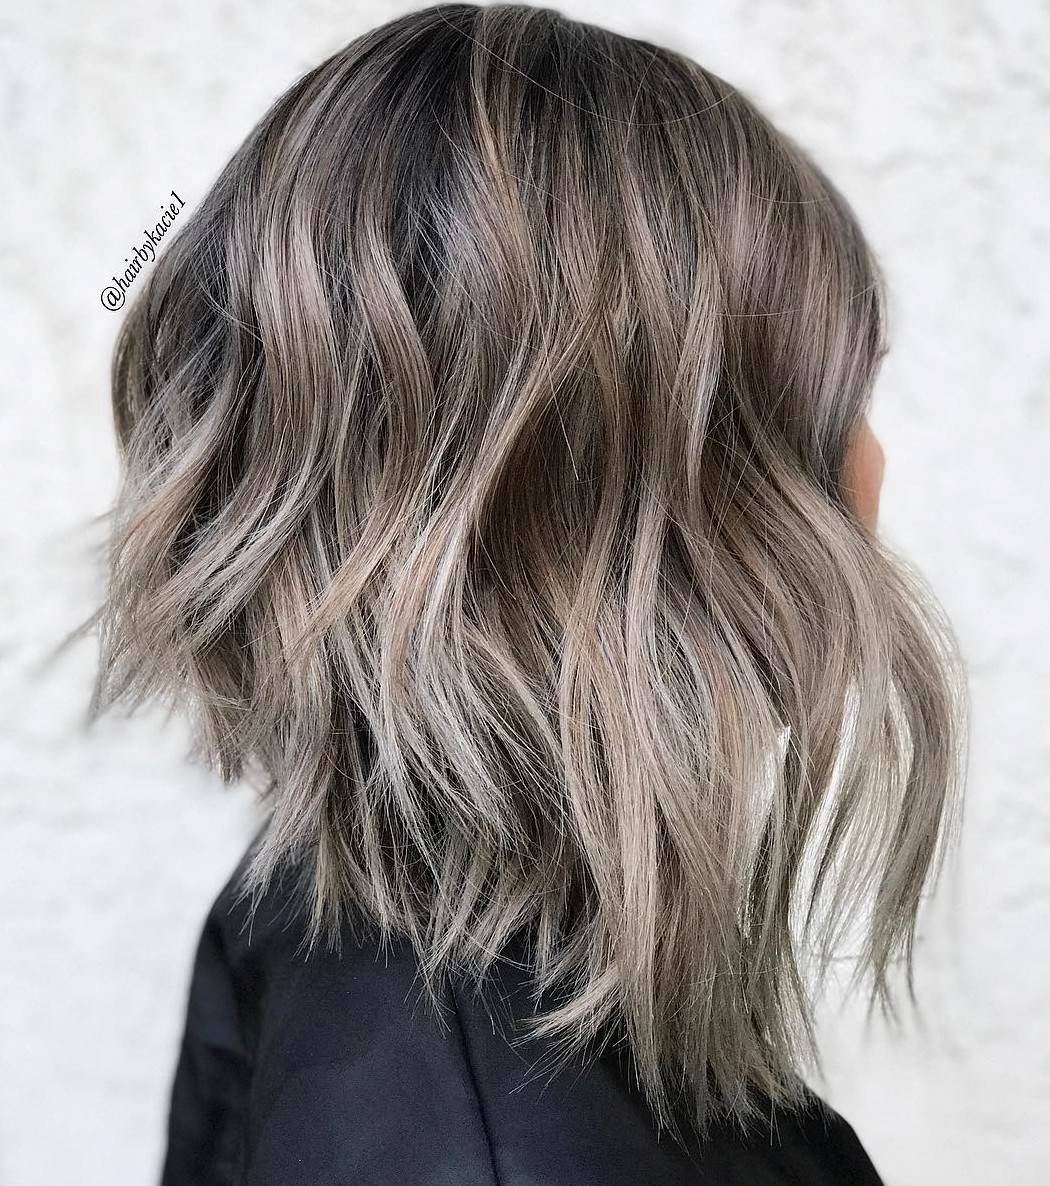 25 Fresh Medium Length Hairstyles for Thick Hair to Enjoy in 2021